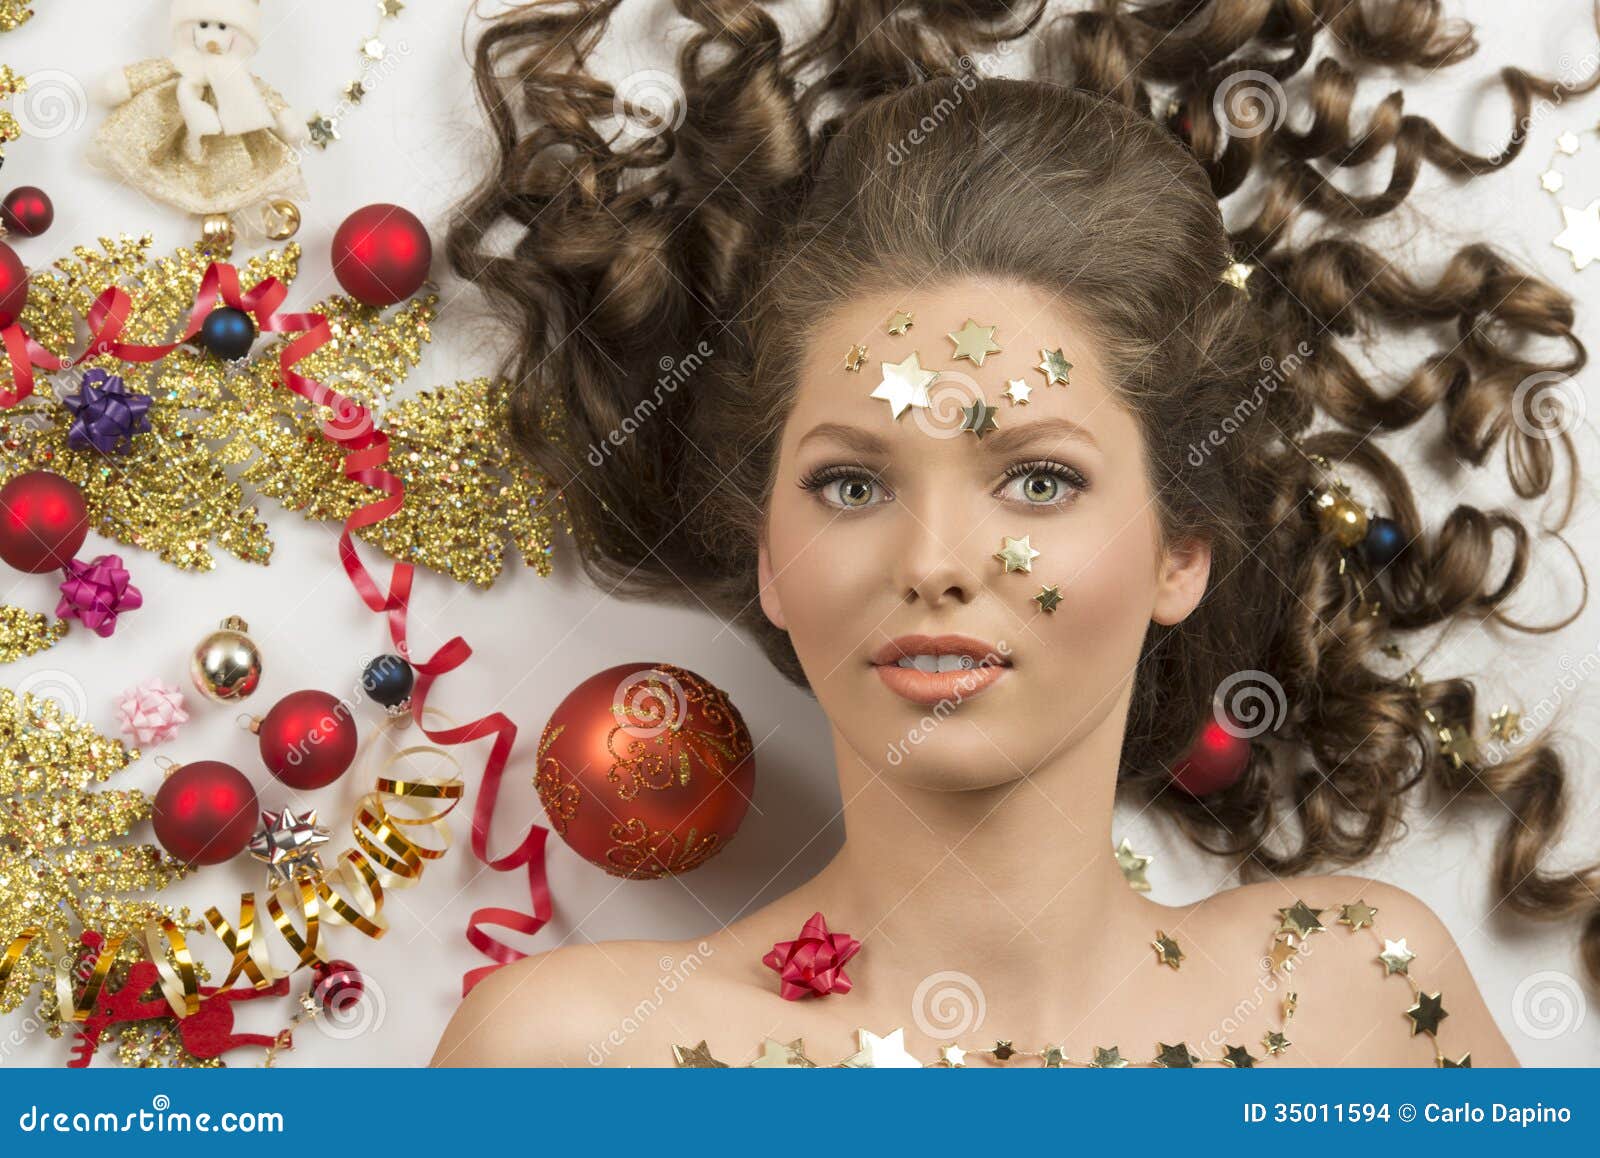 Close-up Shoot Of Christmas Woman Stock Images - Image 